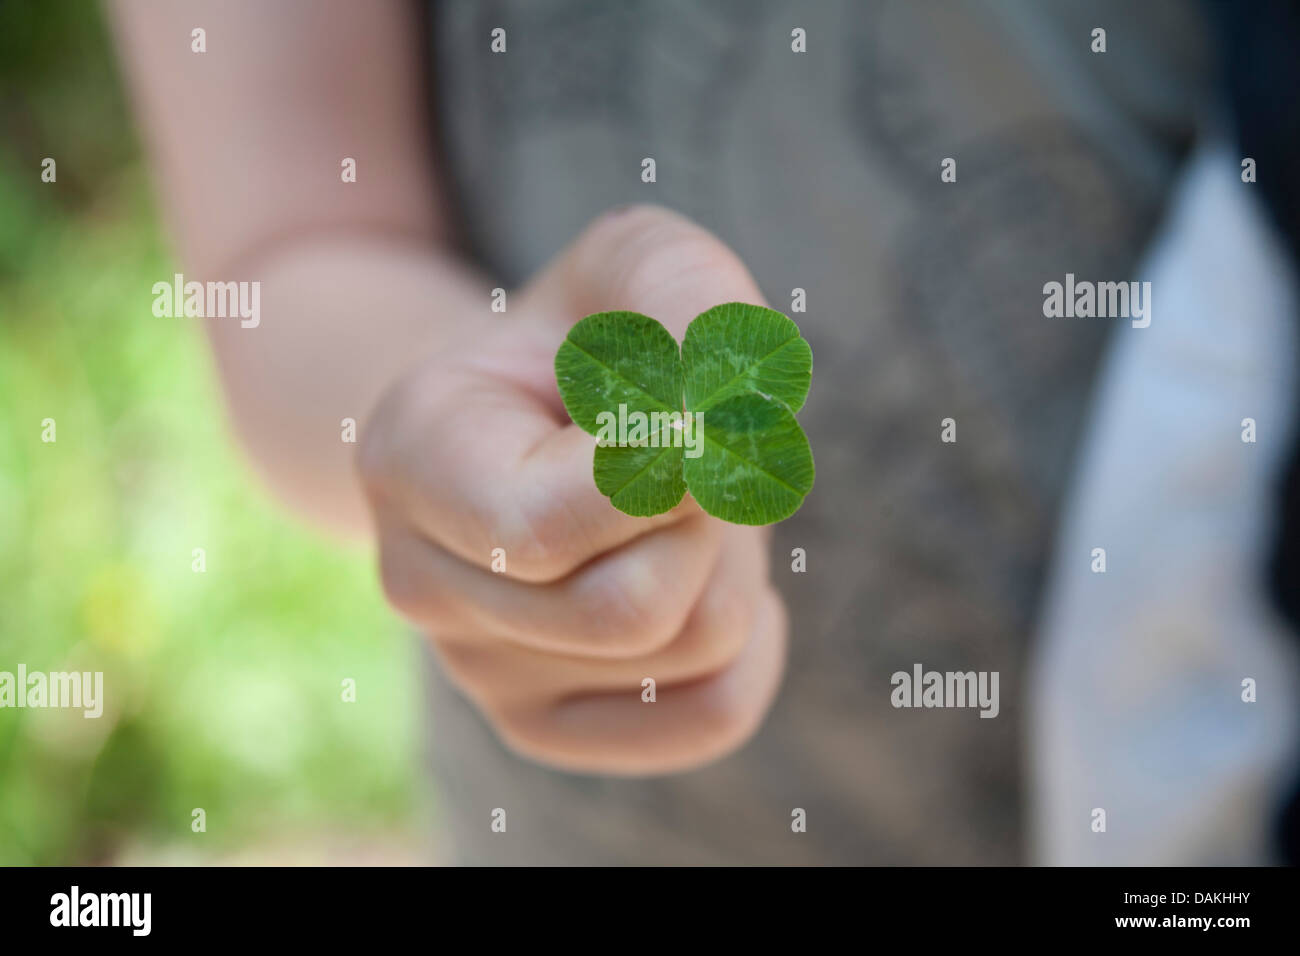 four-leafed clover (Oxalis tetraphylla, Oxalis deppei), in the hand, Germany Stock Photo